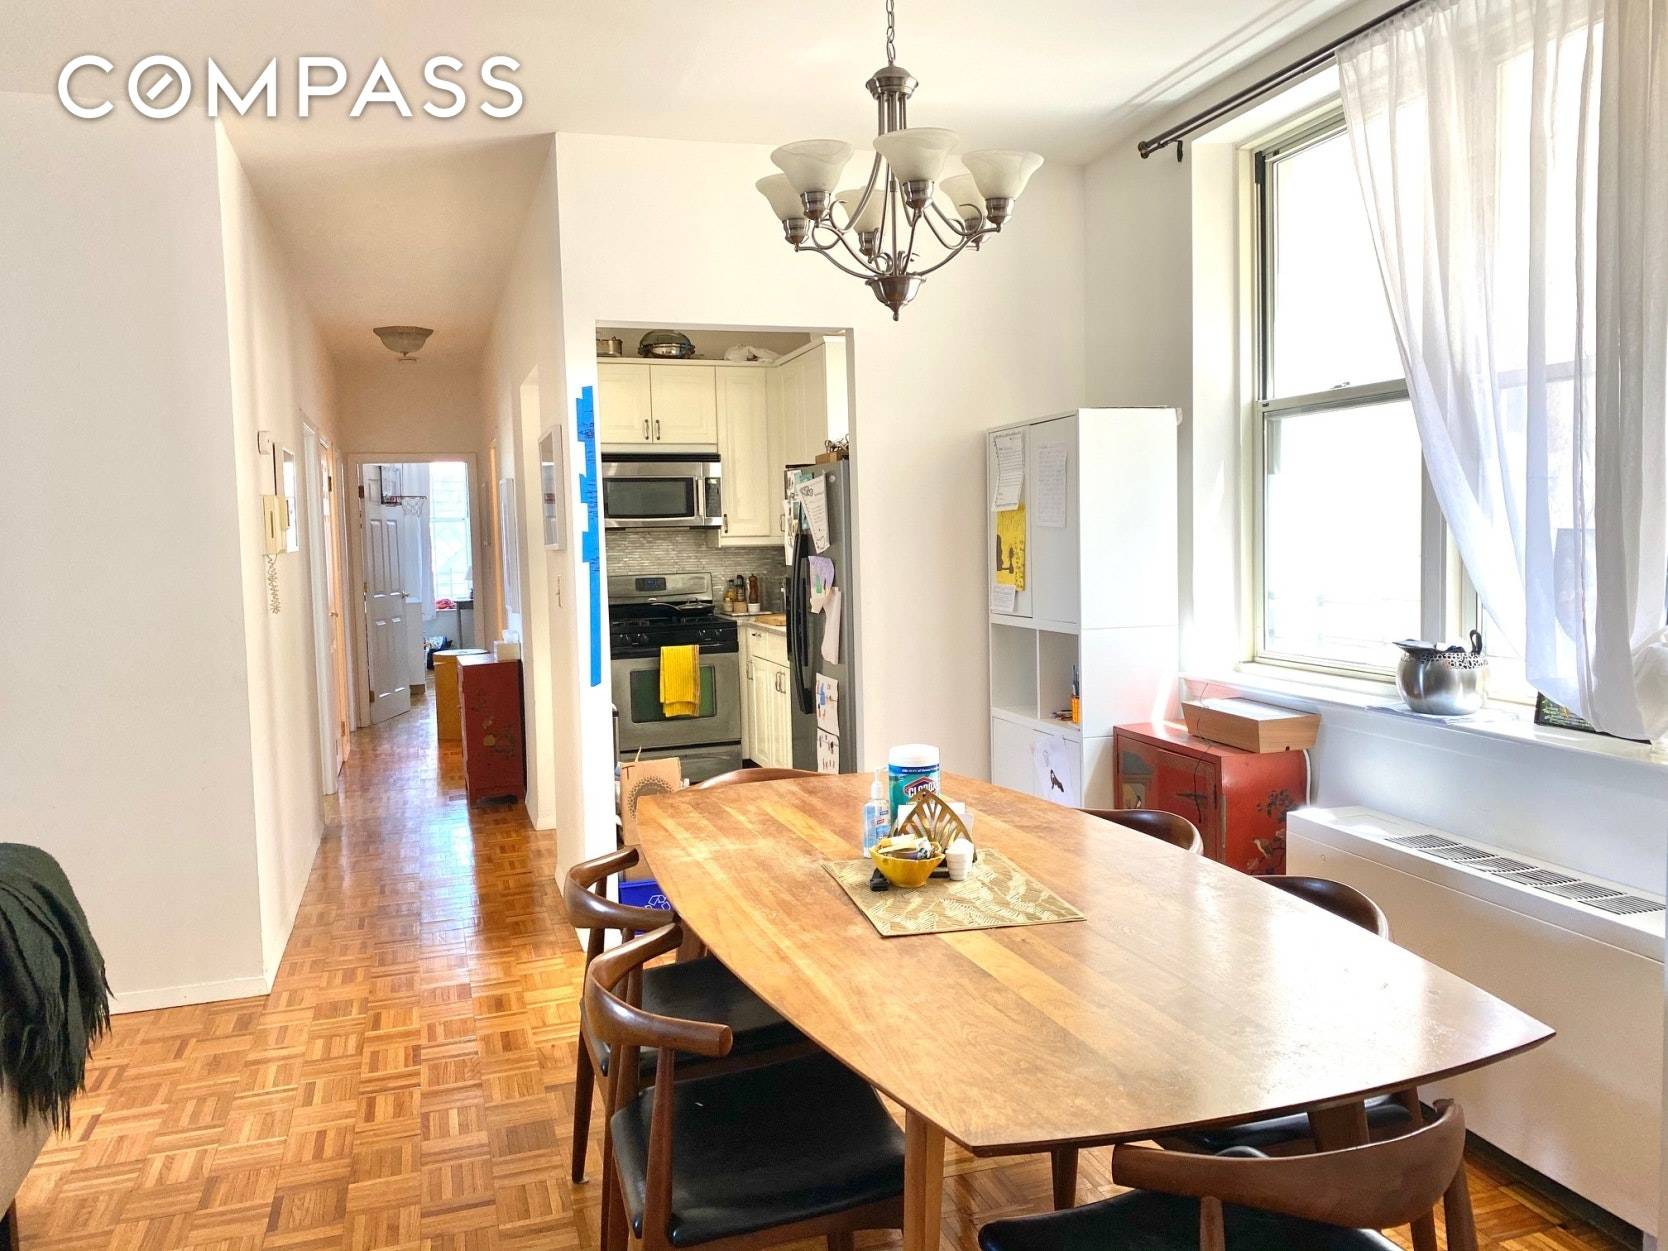 Bright and renovated 3BR 2Baths in a condo building with an elevator and shared garden with barbecue area.